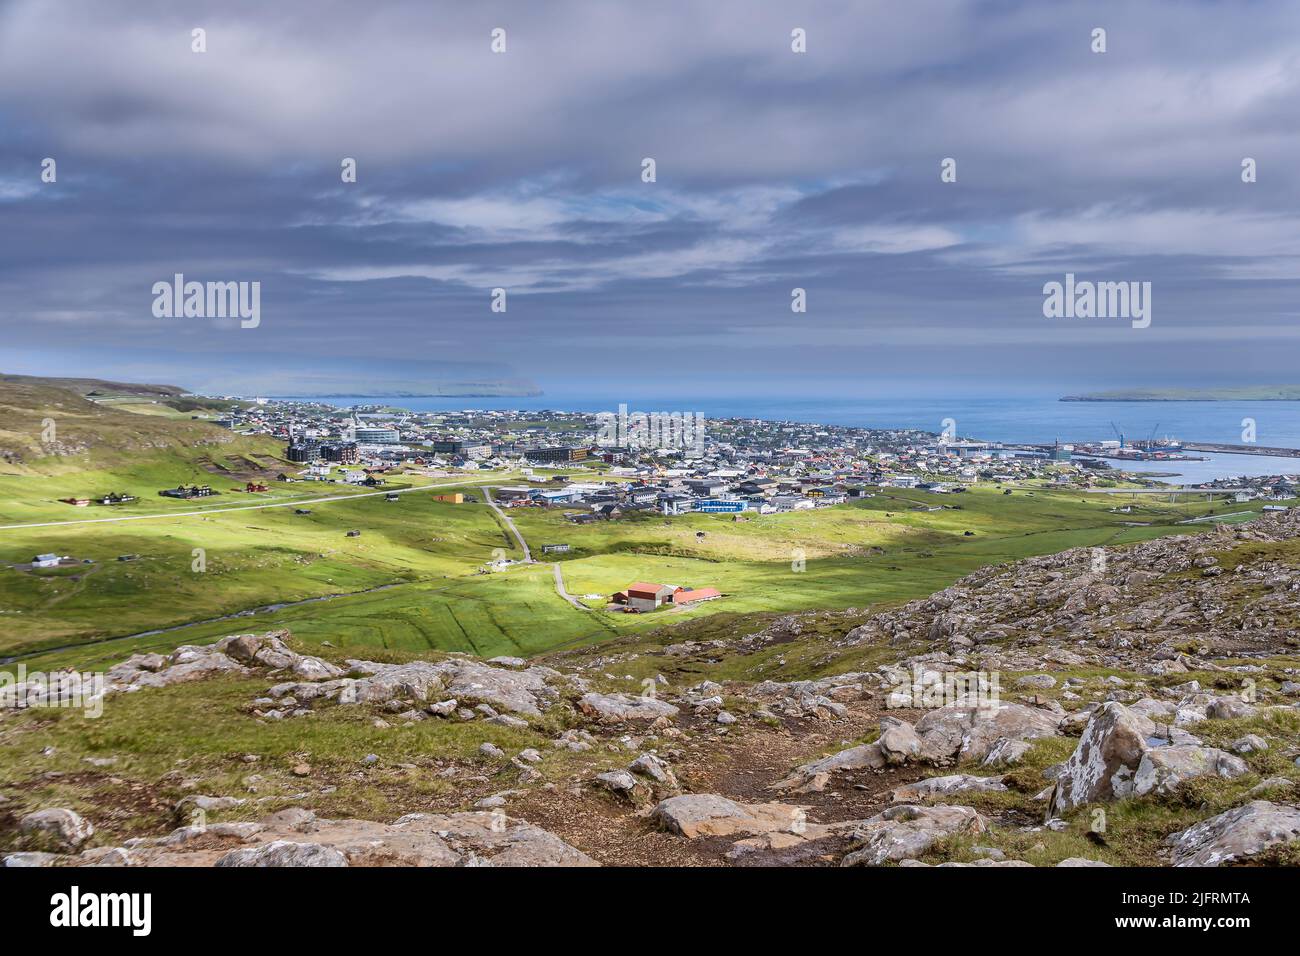 Torshavn city seen from the highlands behind the city, Faroe Islands Stock Photo